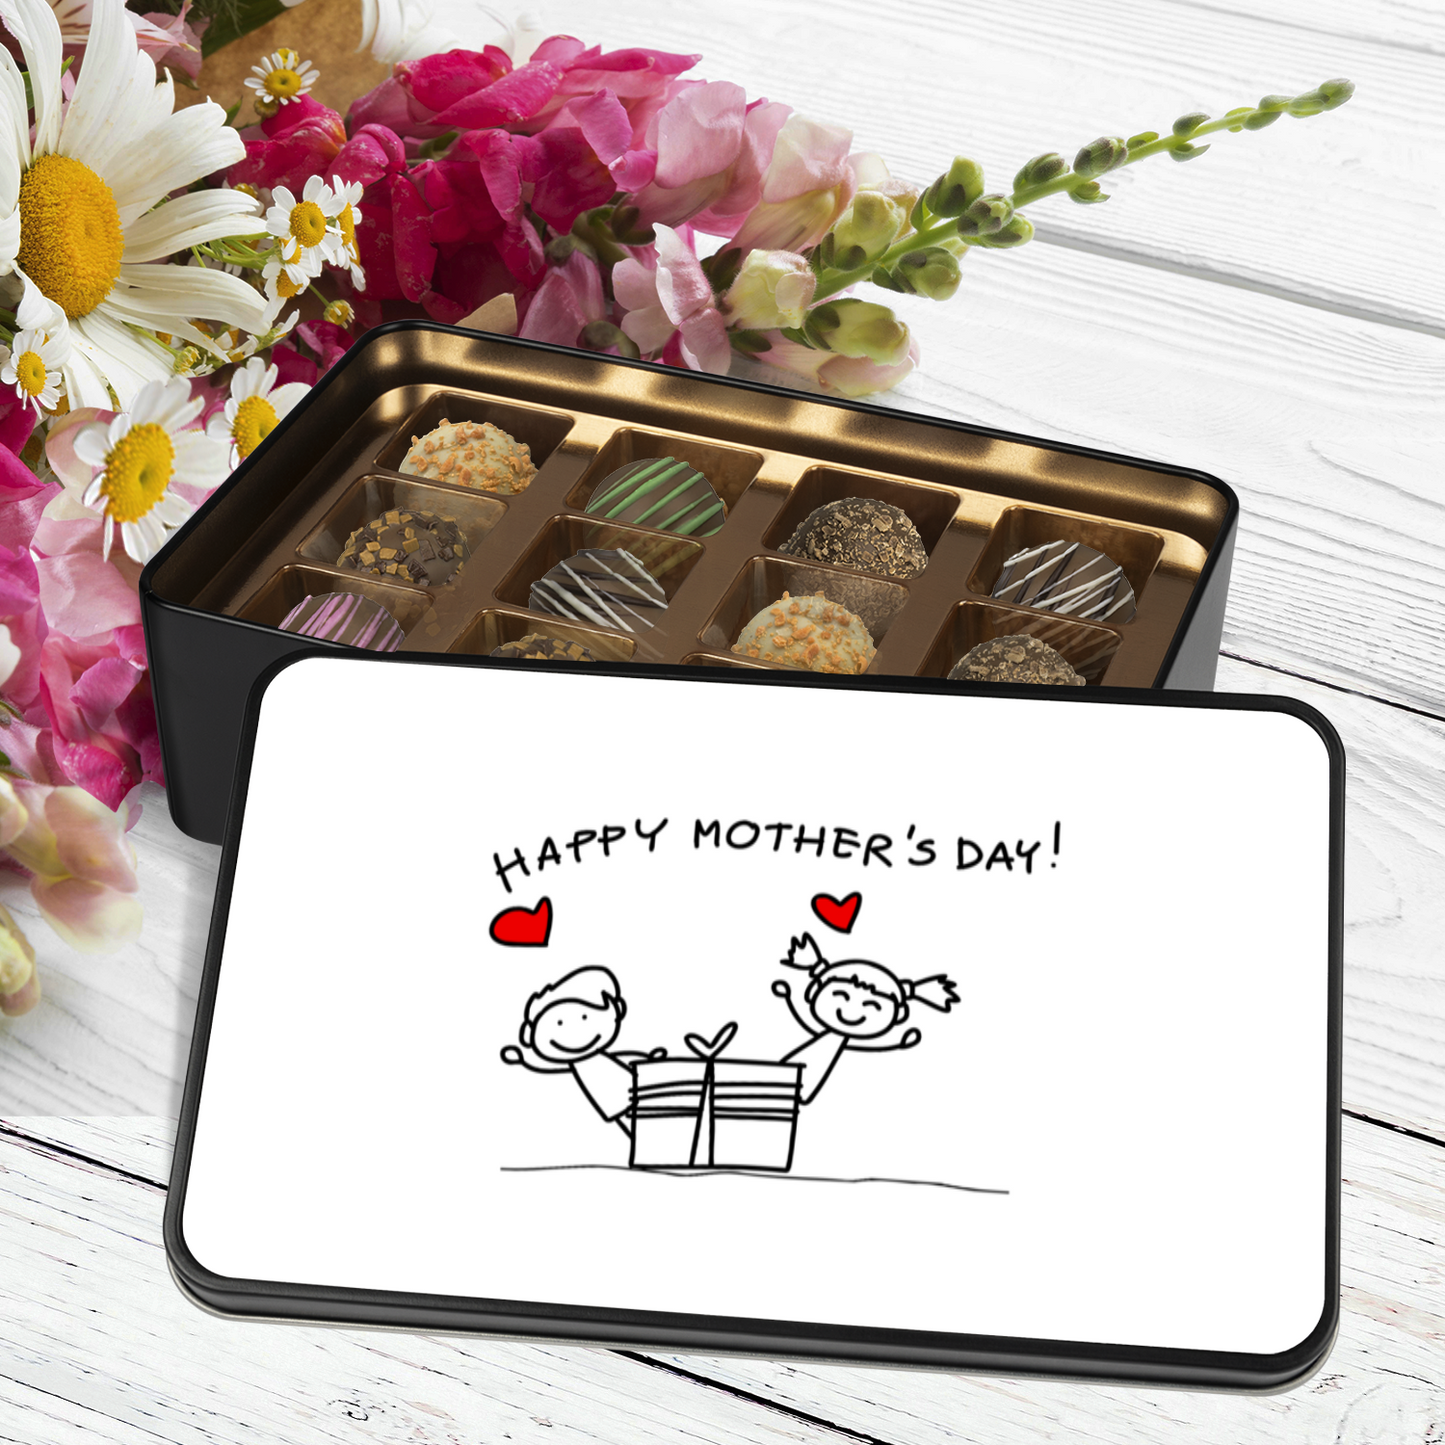 Happy Mother's Day Chocolate Truffles Keepsake Tin, Gift for Mom from Children - Mardonyx Candy